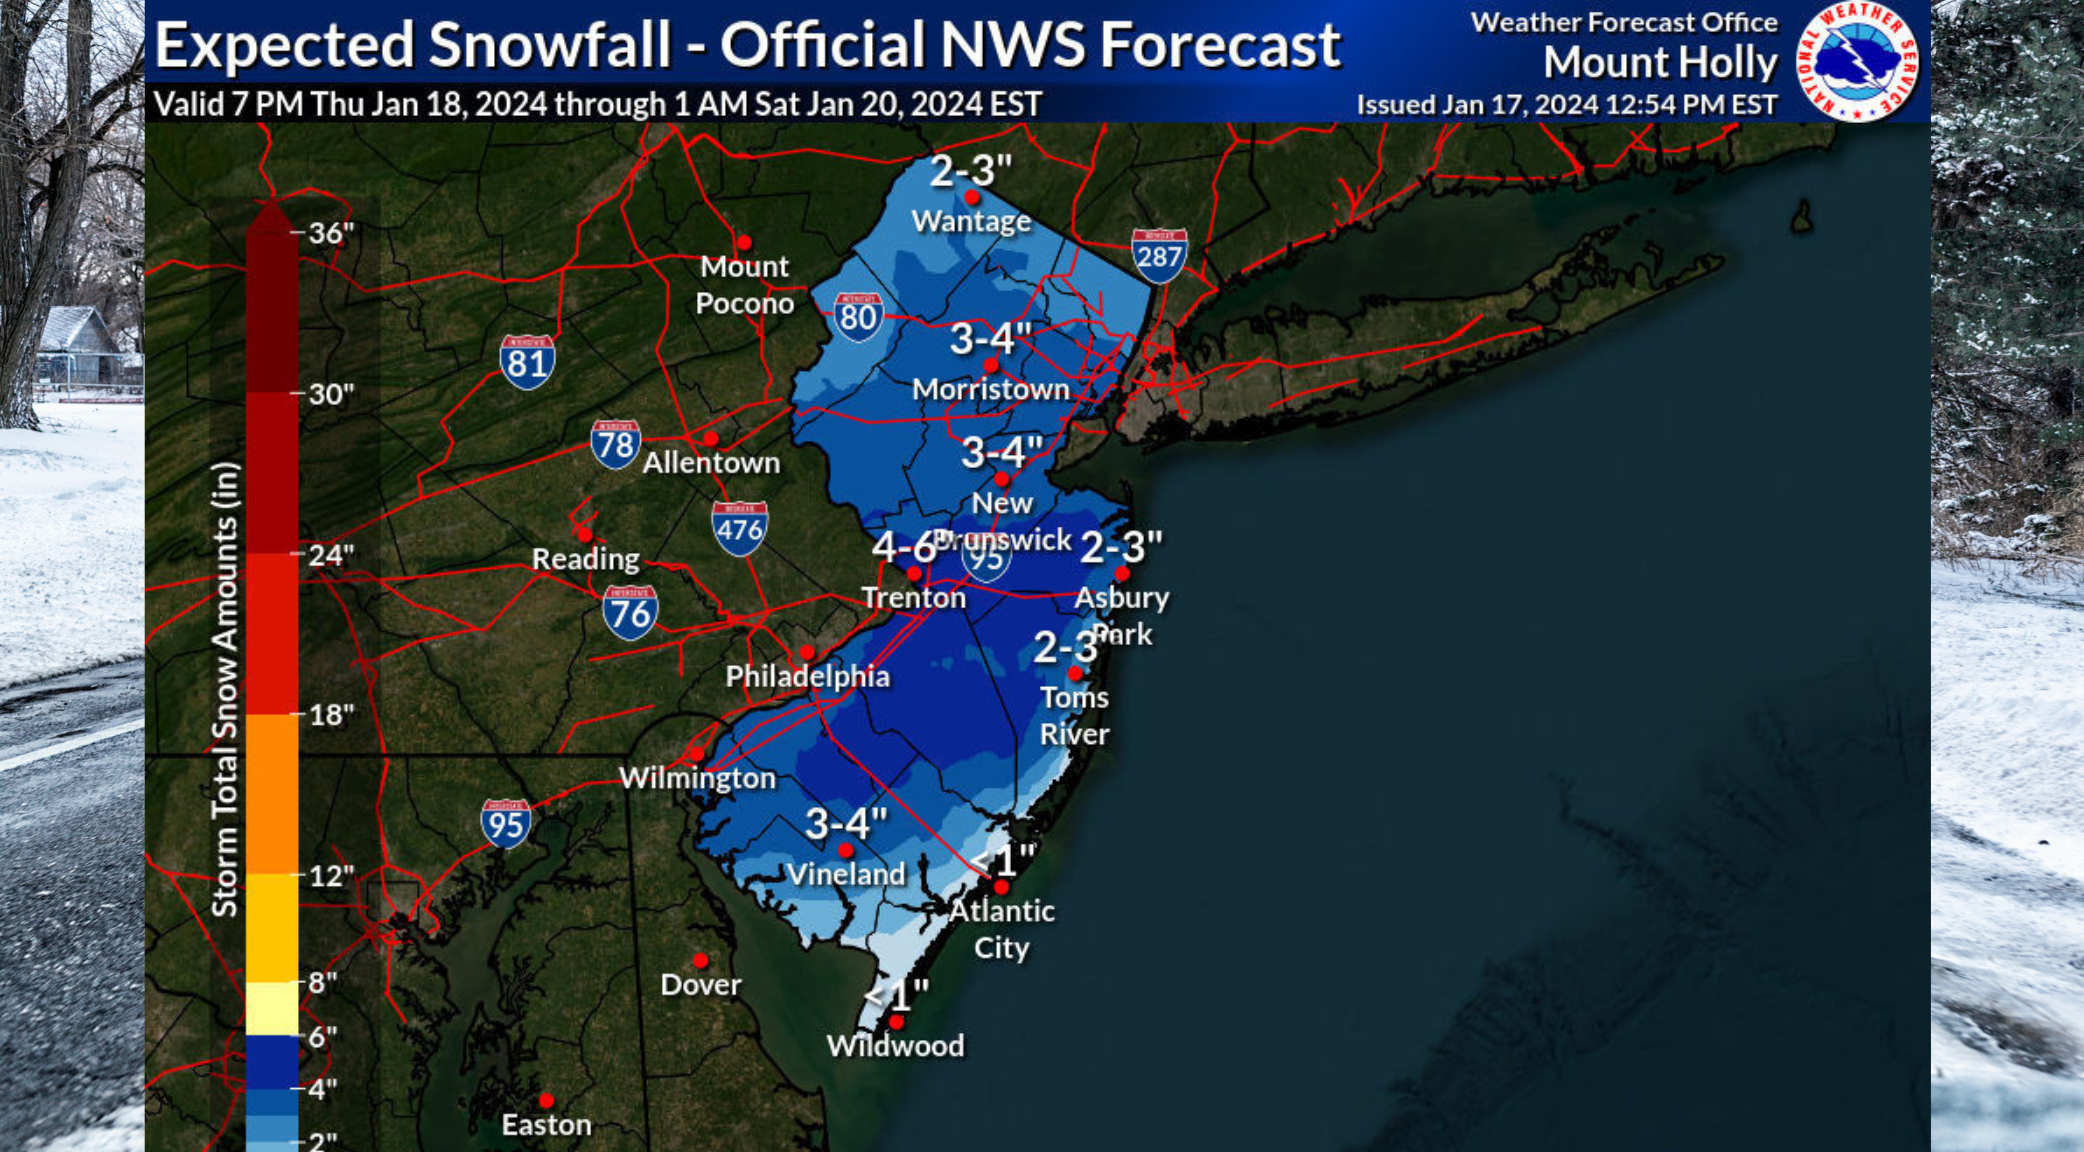 The latest storm forecast calls for 4 to 6 inches of snow in parts of the state on Friday